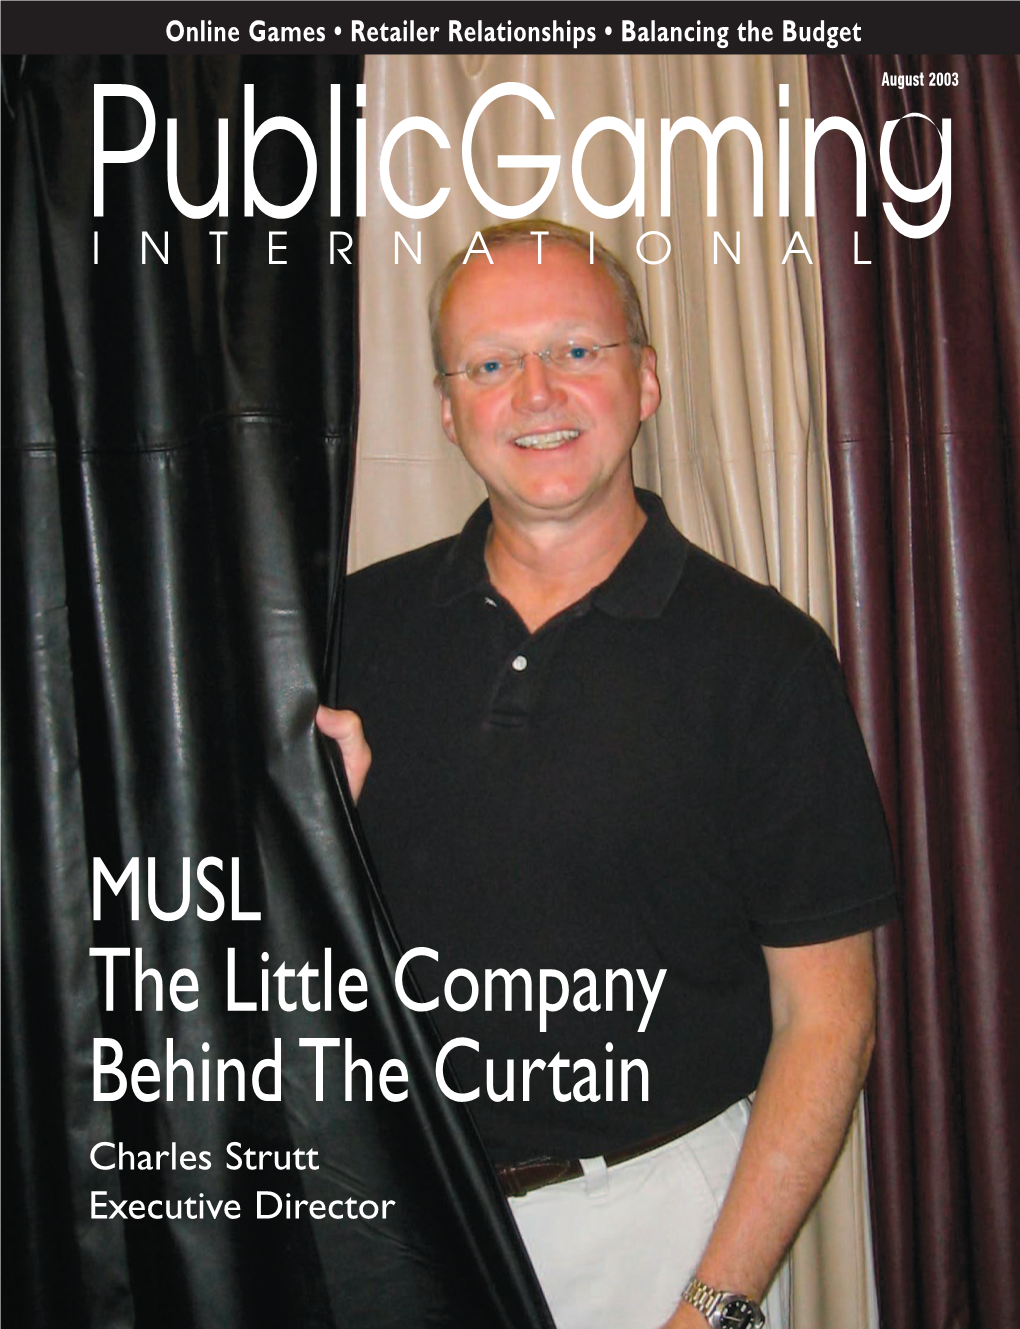 MUSL the Little Company Behind the Curtain Charles Strutt Executive Director Goodson Stars Ad II.5 8/12/03 12:49 PM Page 1